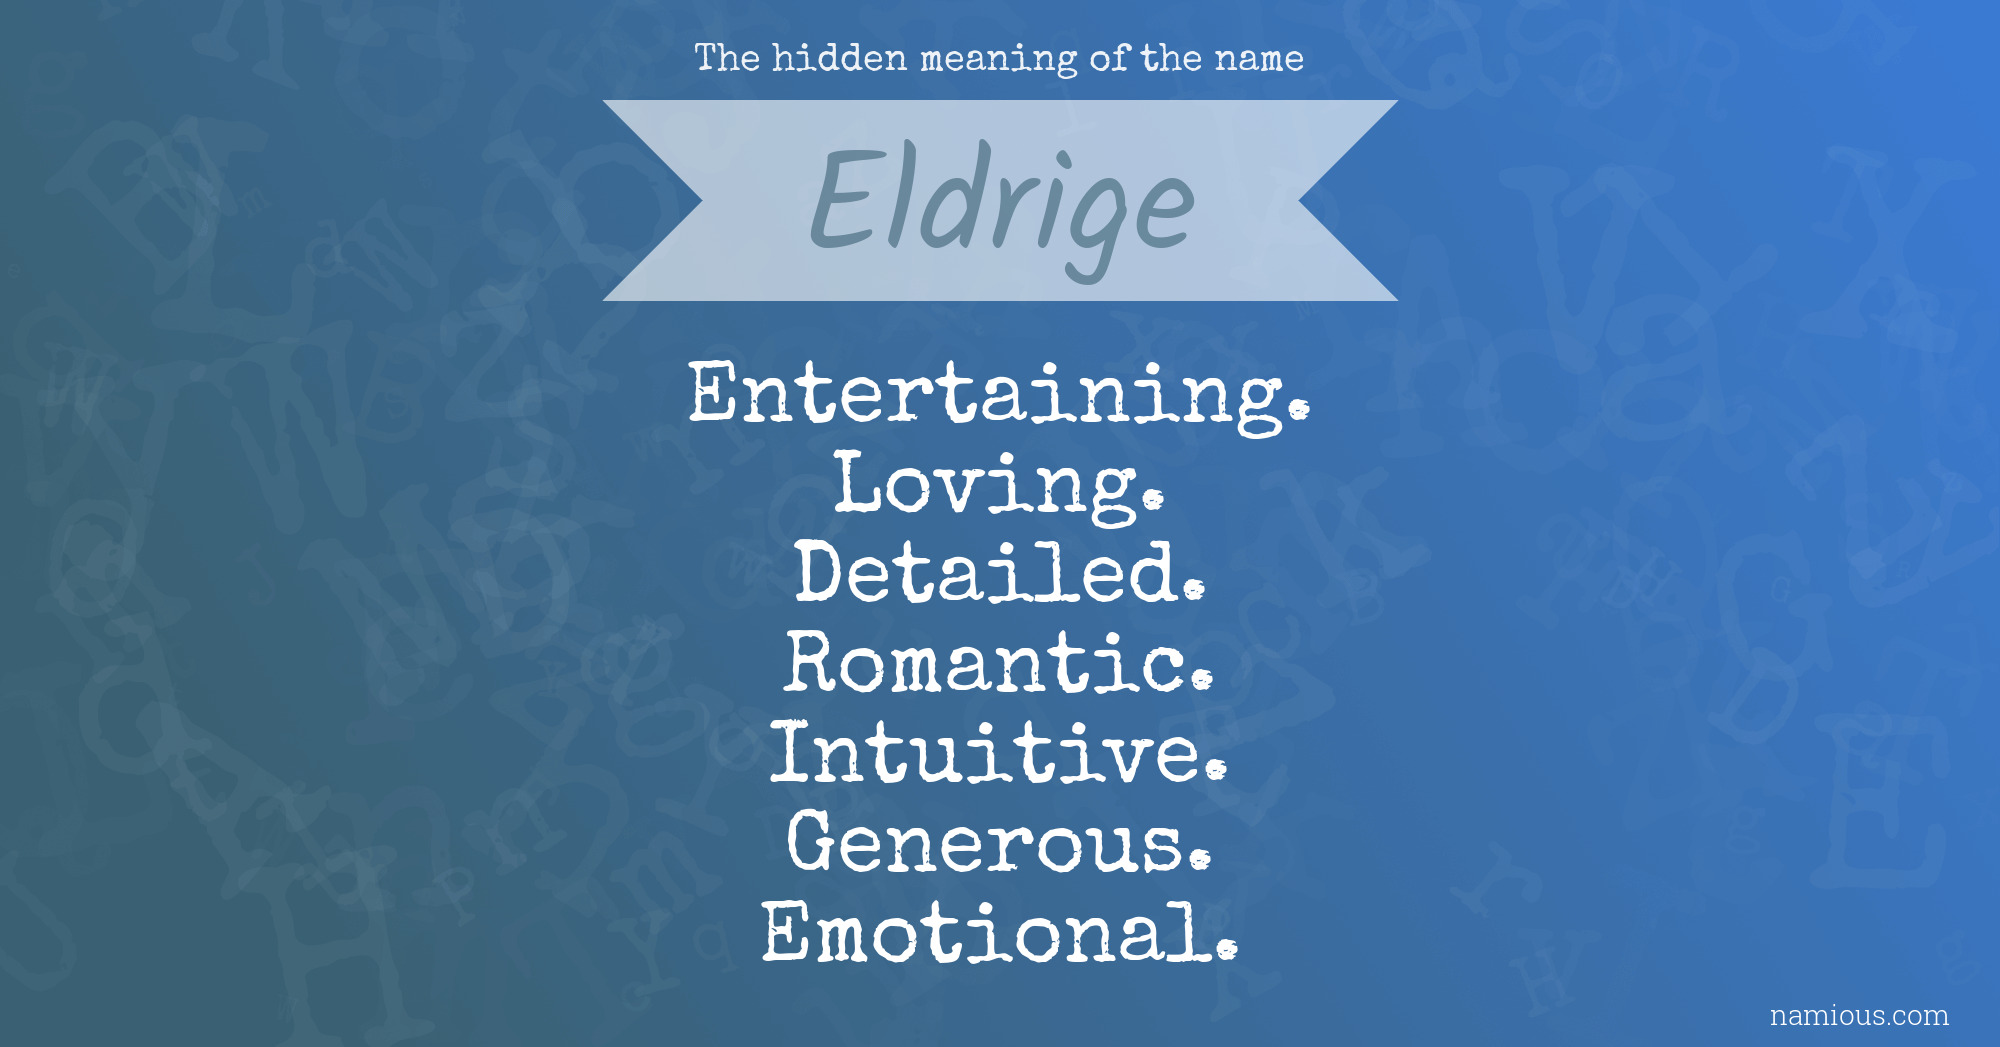 The hidden meaning of the name Eldrige